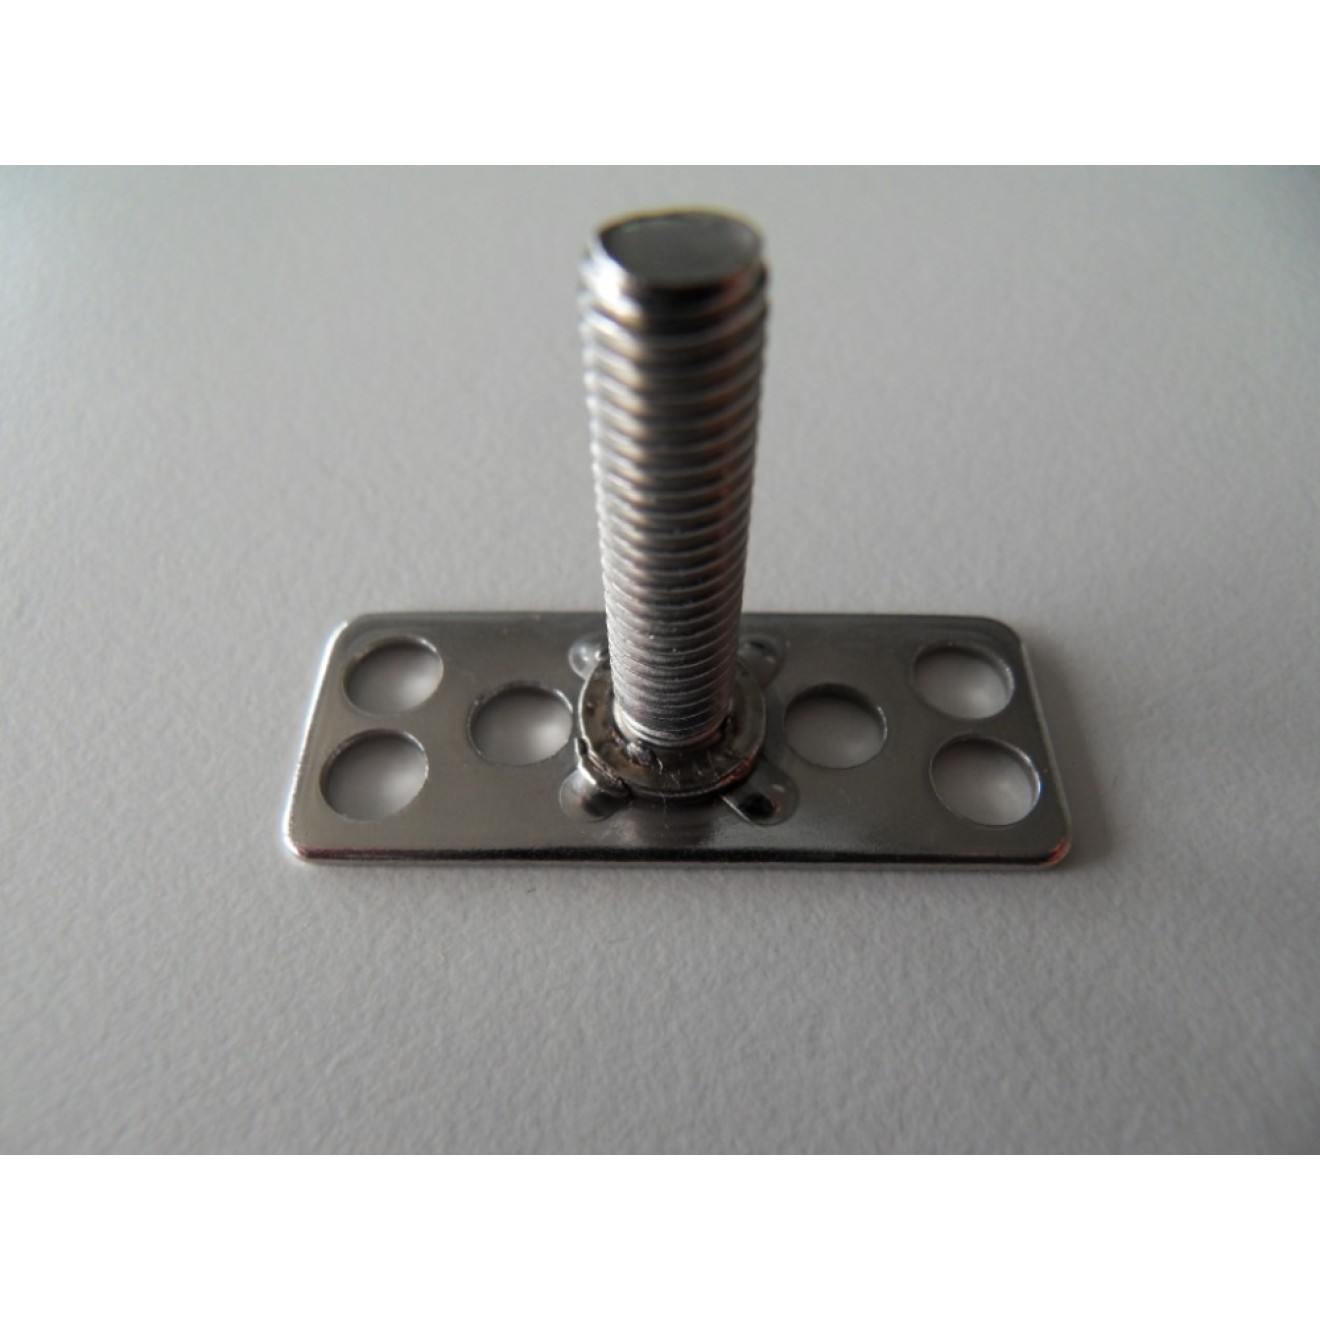 Stainless steel fasteners, male threaded stud M6x25